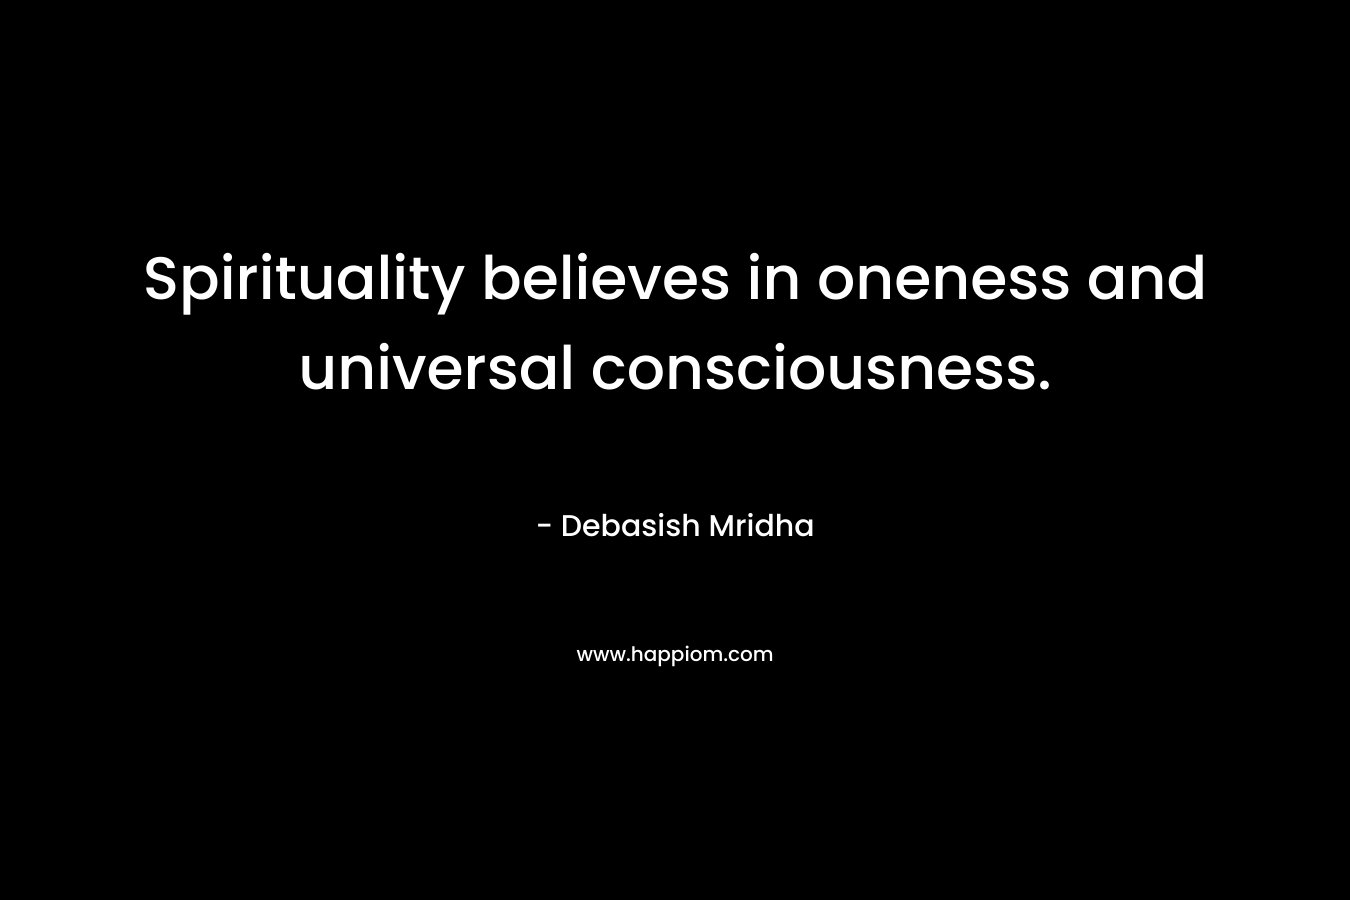 Spirituality believes in oneness and universal consciousness.